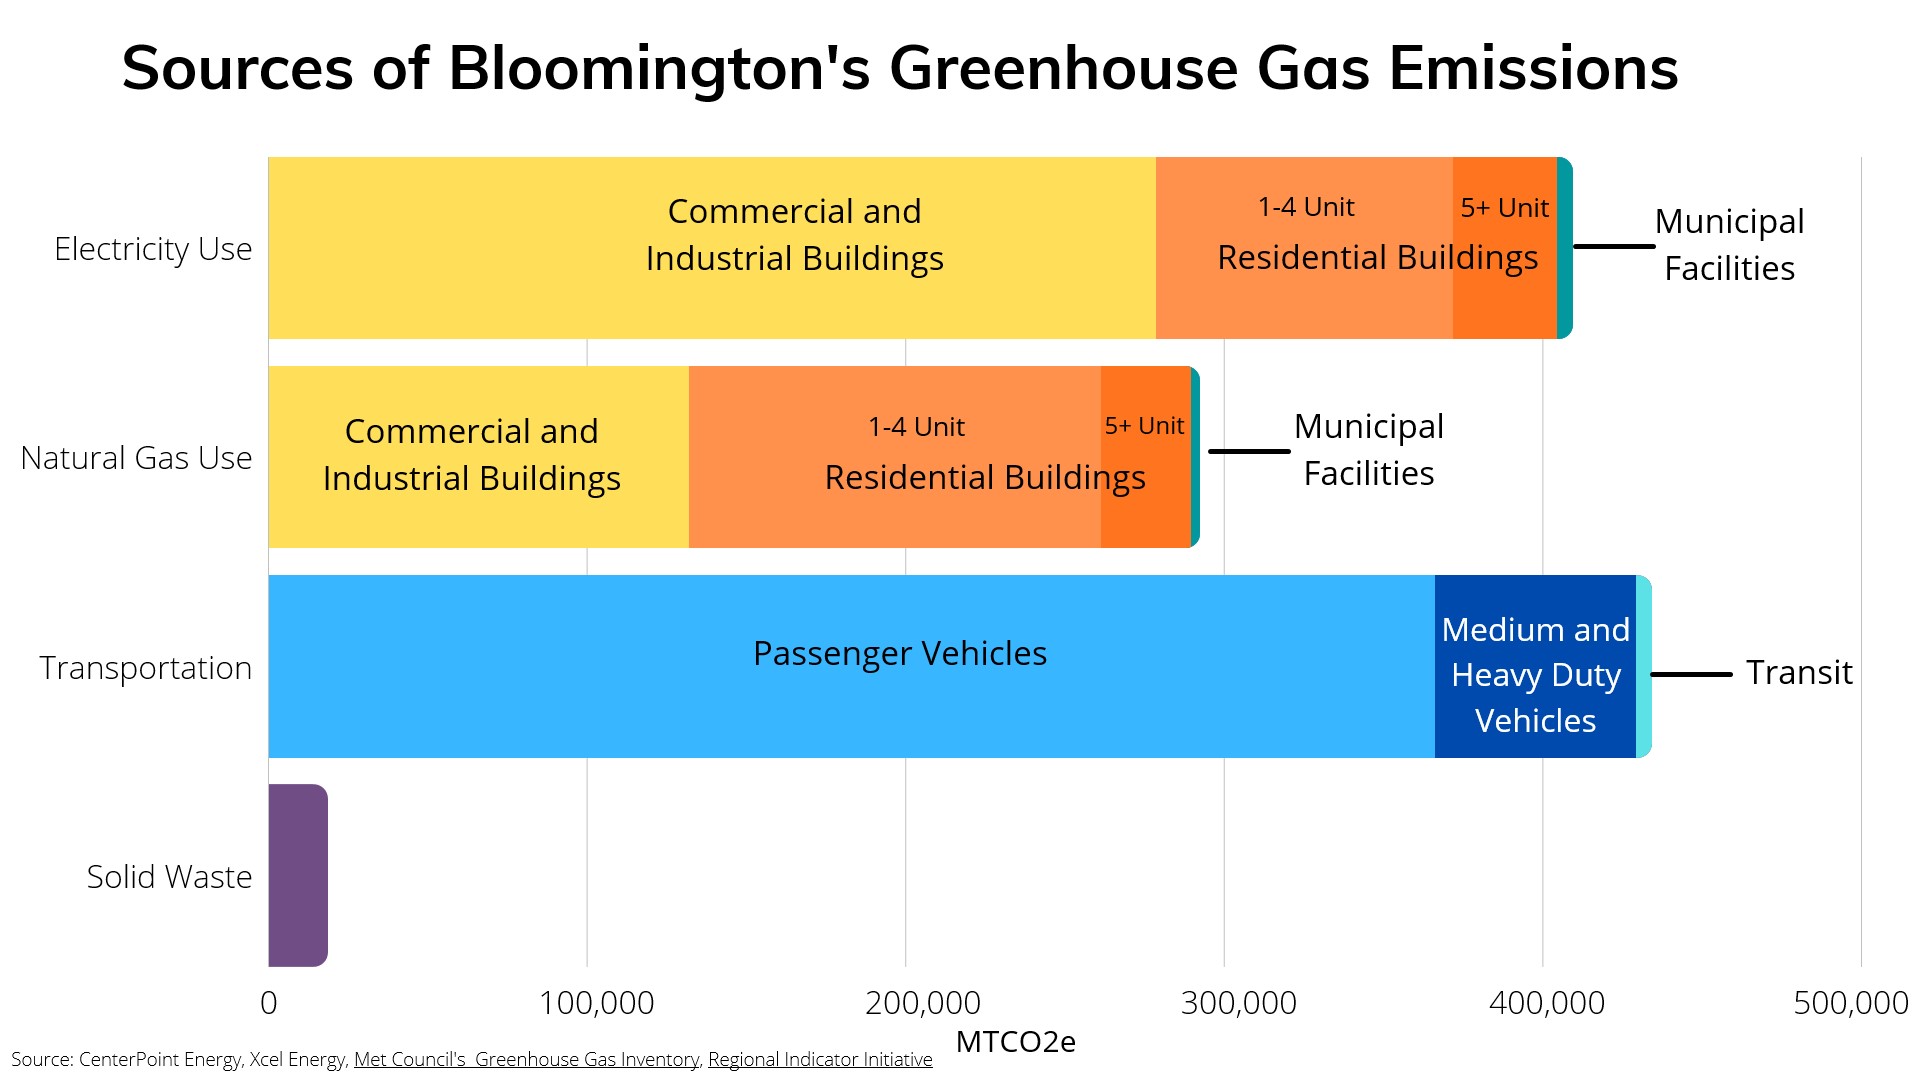 Sources of Bloomington's Greenhouse Gas Emissions